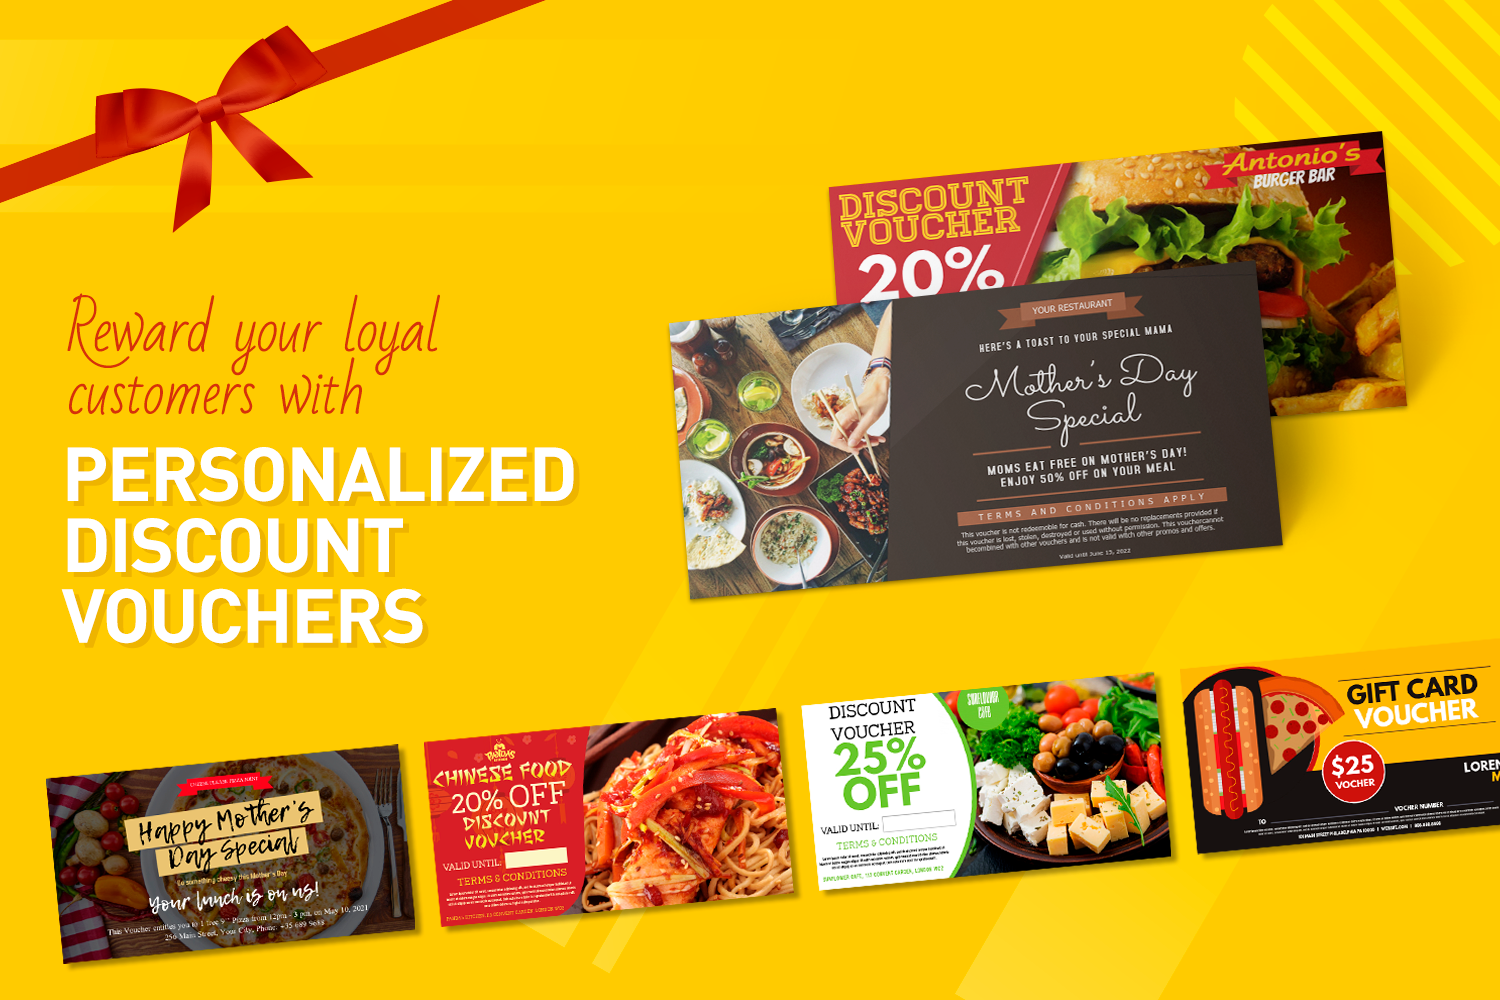 Reward your loyal customers with personalized discount vouchers